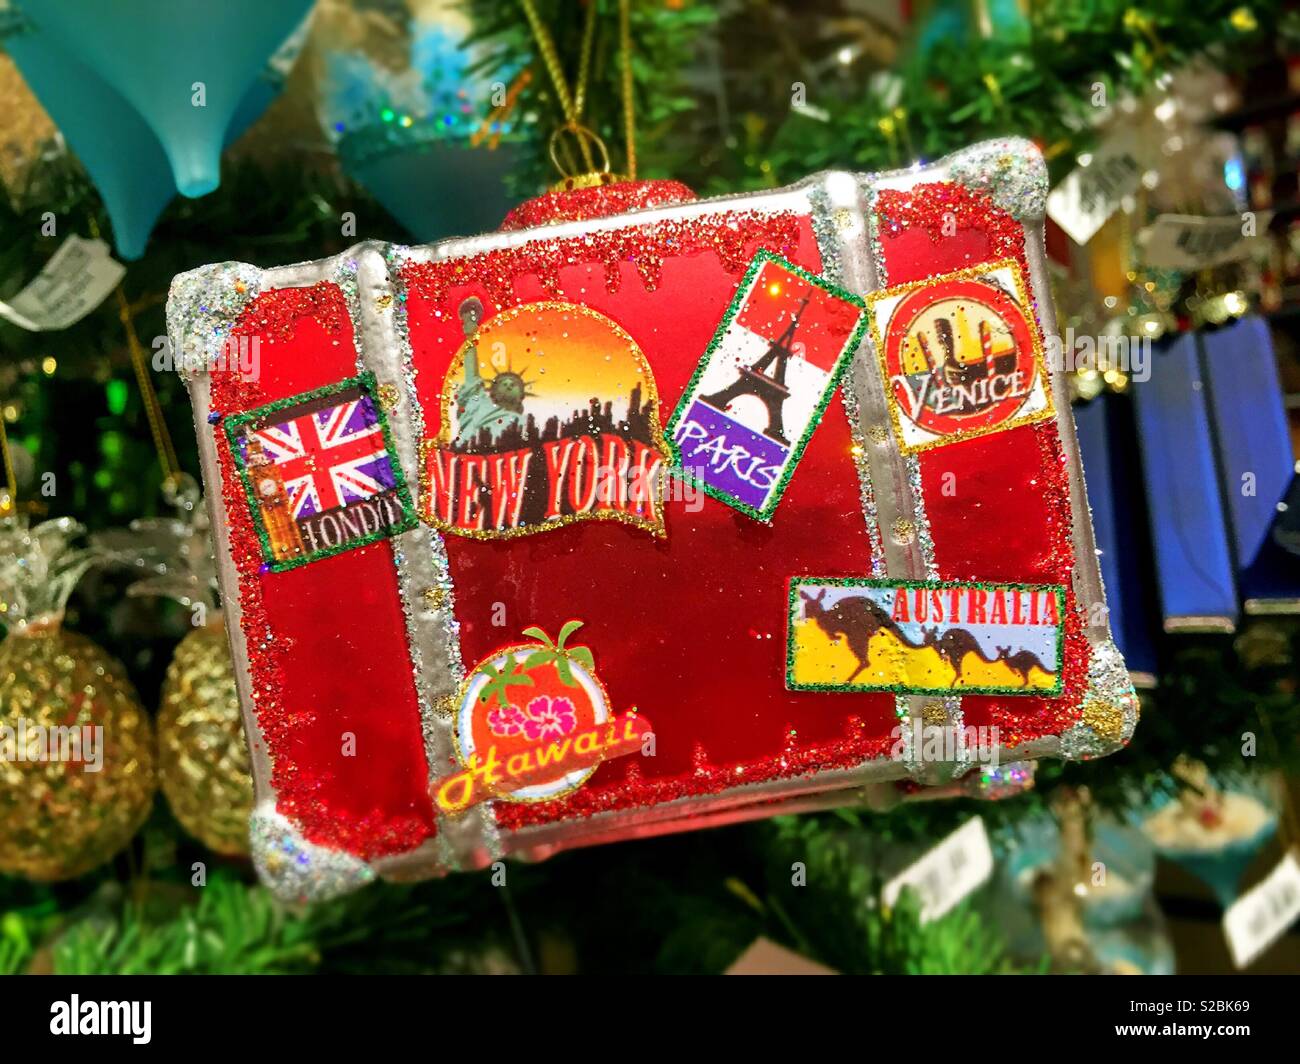 Christmas ornament in the shape of a well-traveled suitcase hanging from a Christmas tree, USA Stock Photo